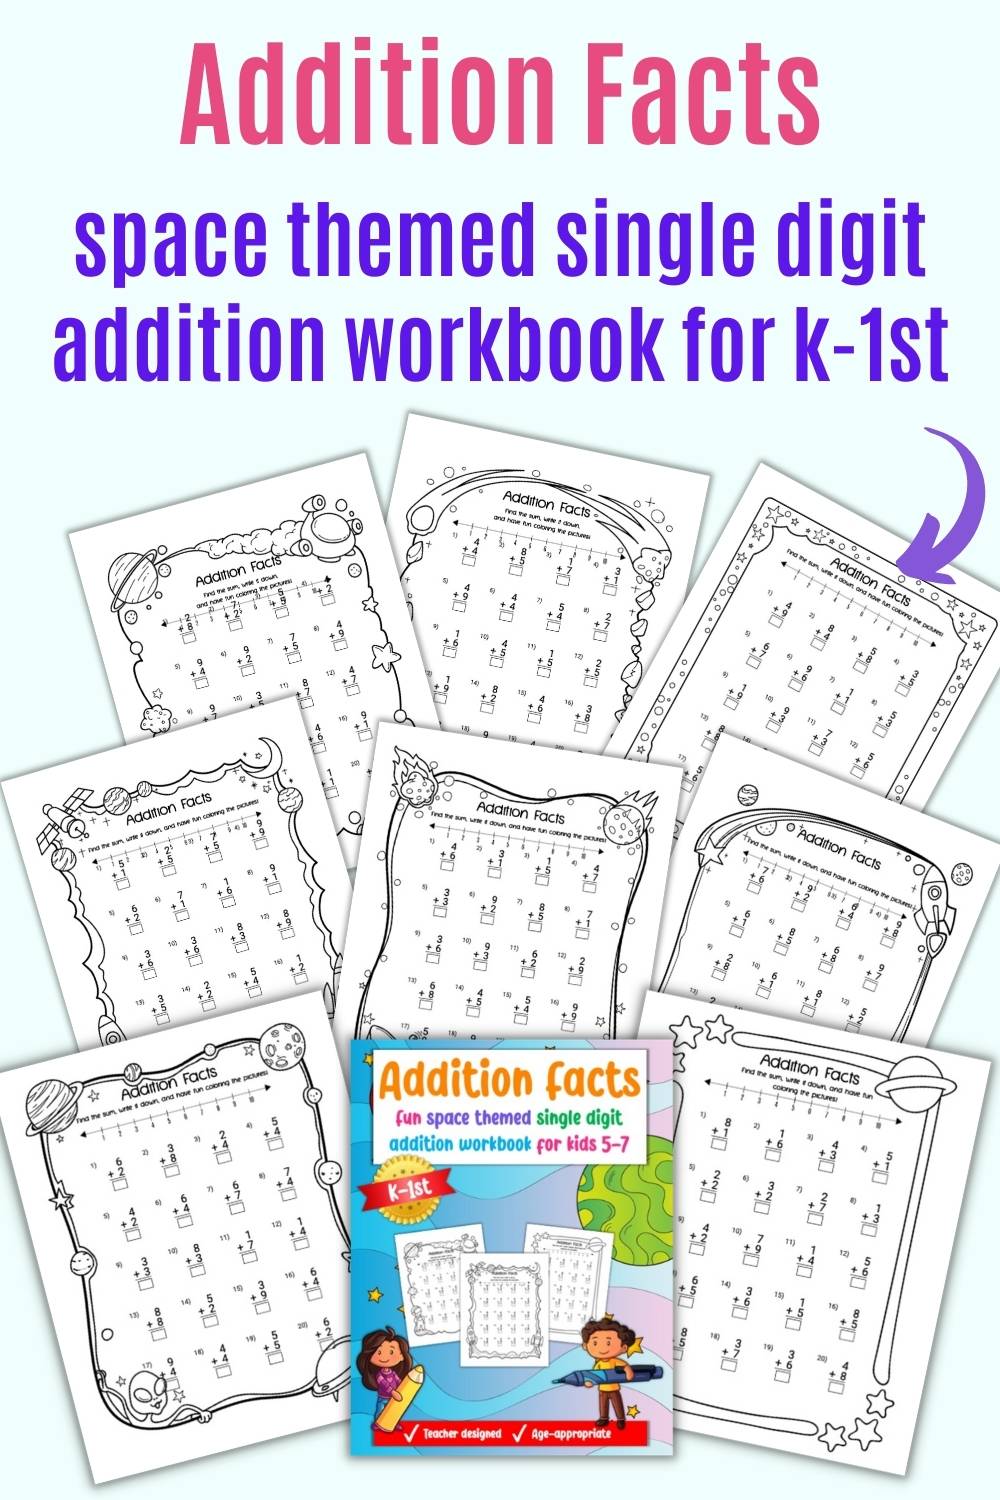 A preview of the front cover of and 8 pages from a single digit addition workbook for kindergarteners